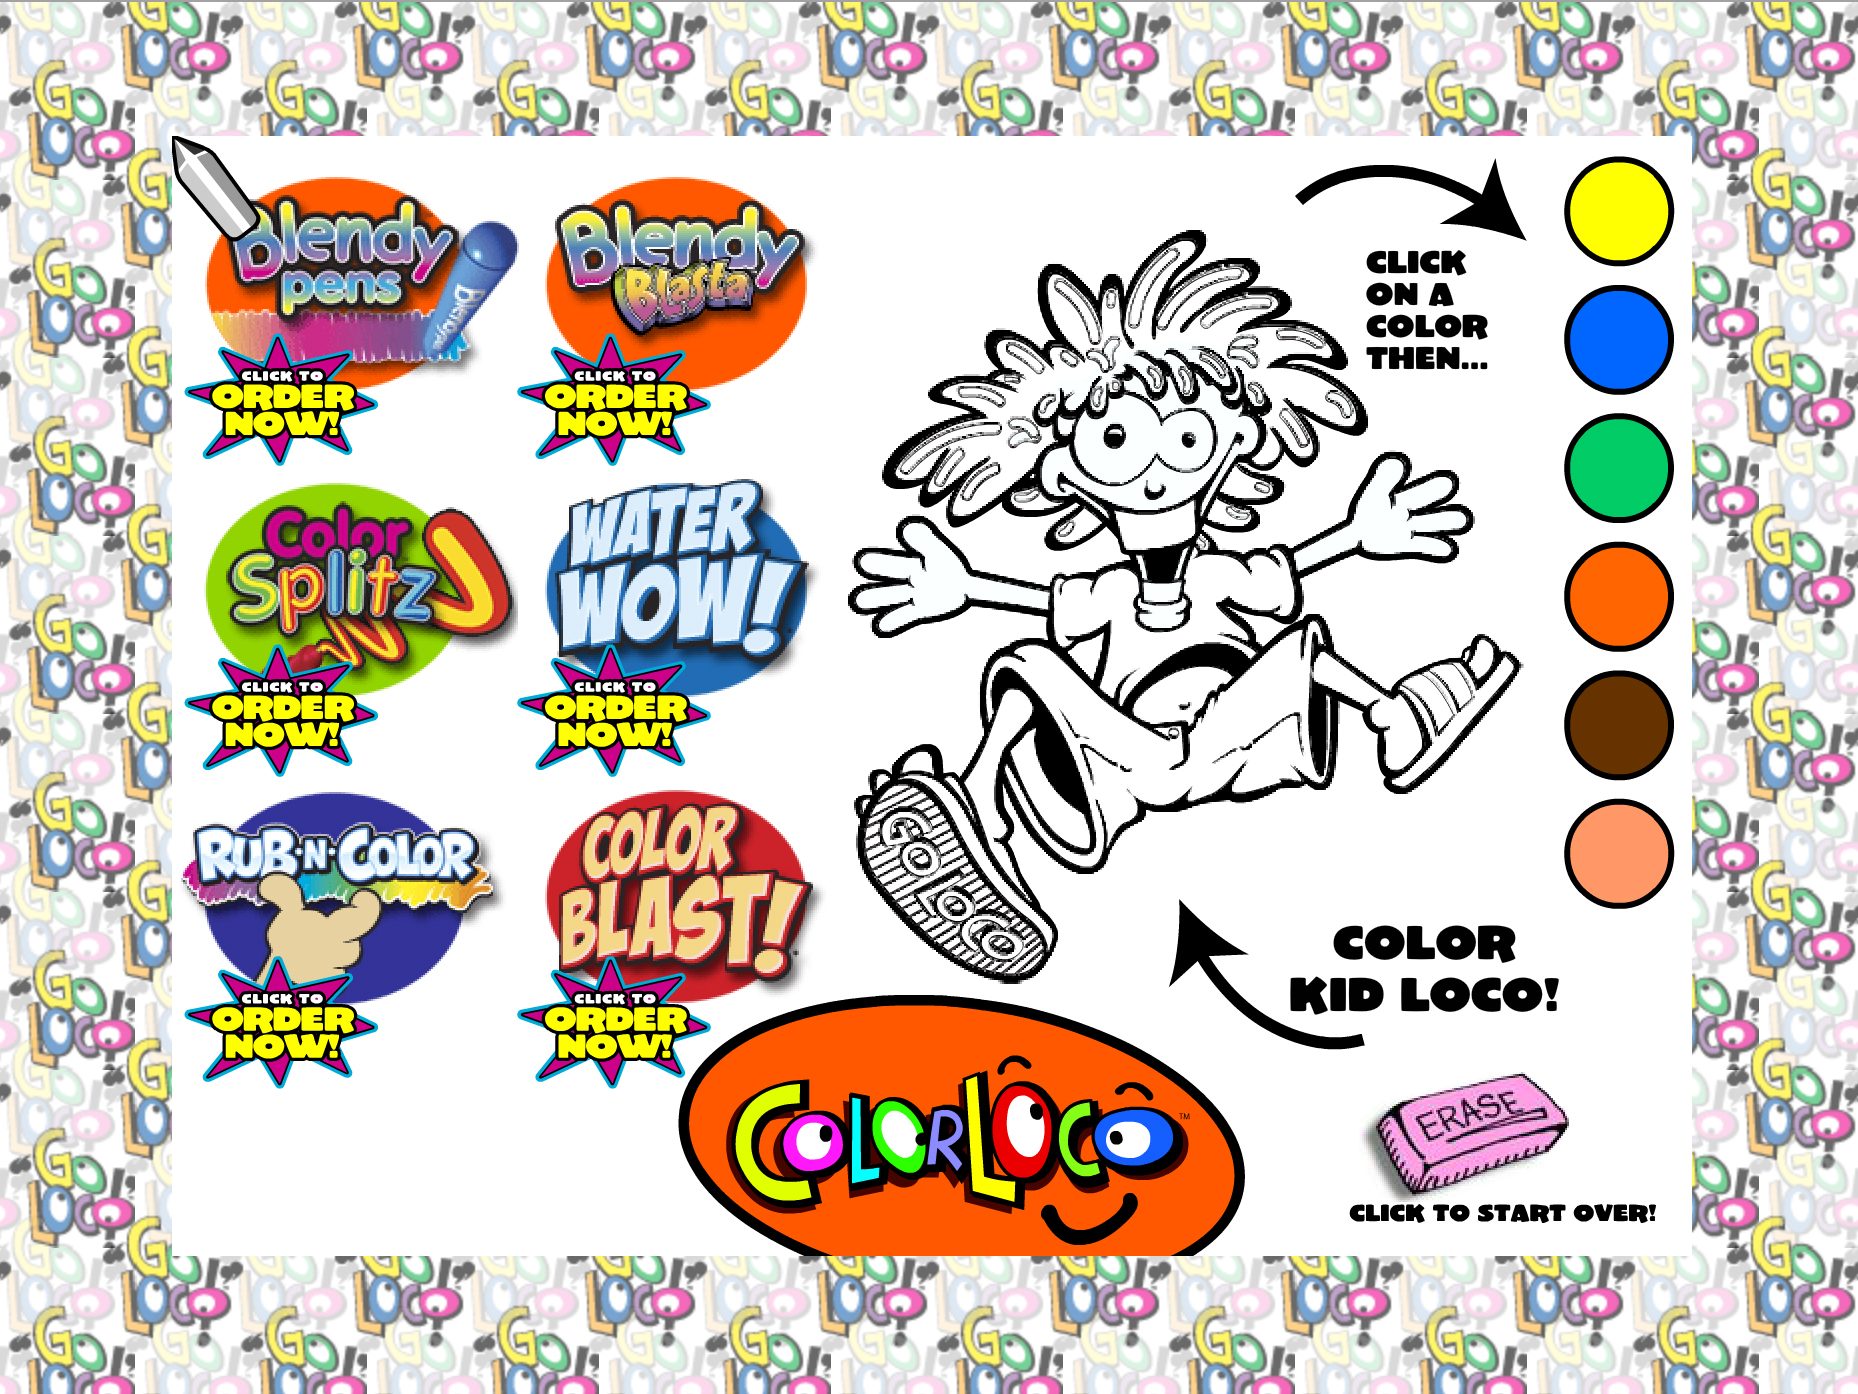 View Interactive Flash Coloring Website